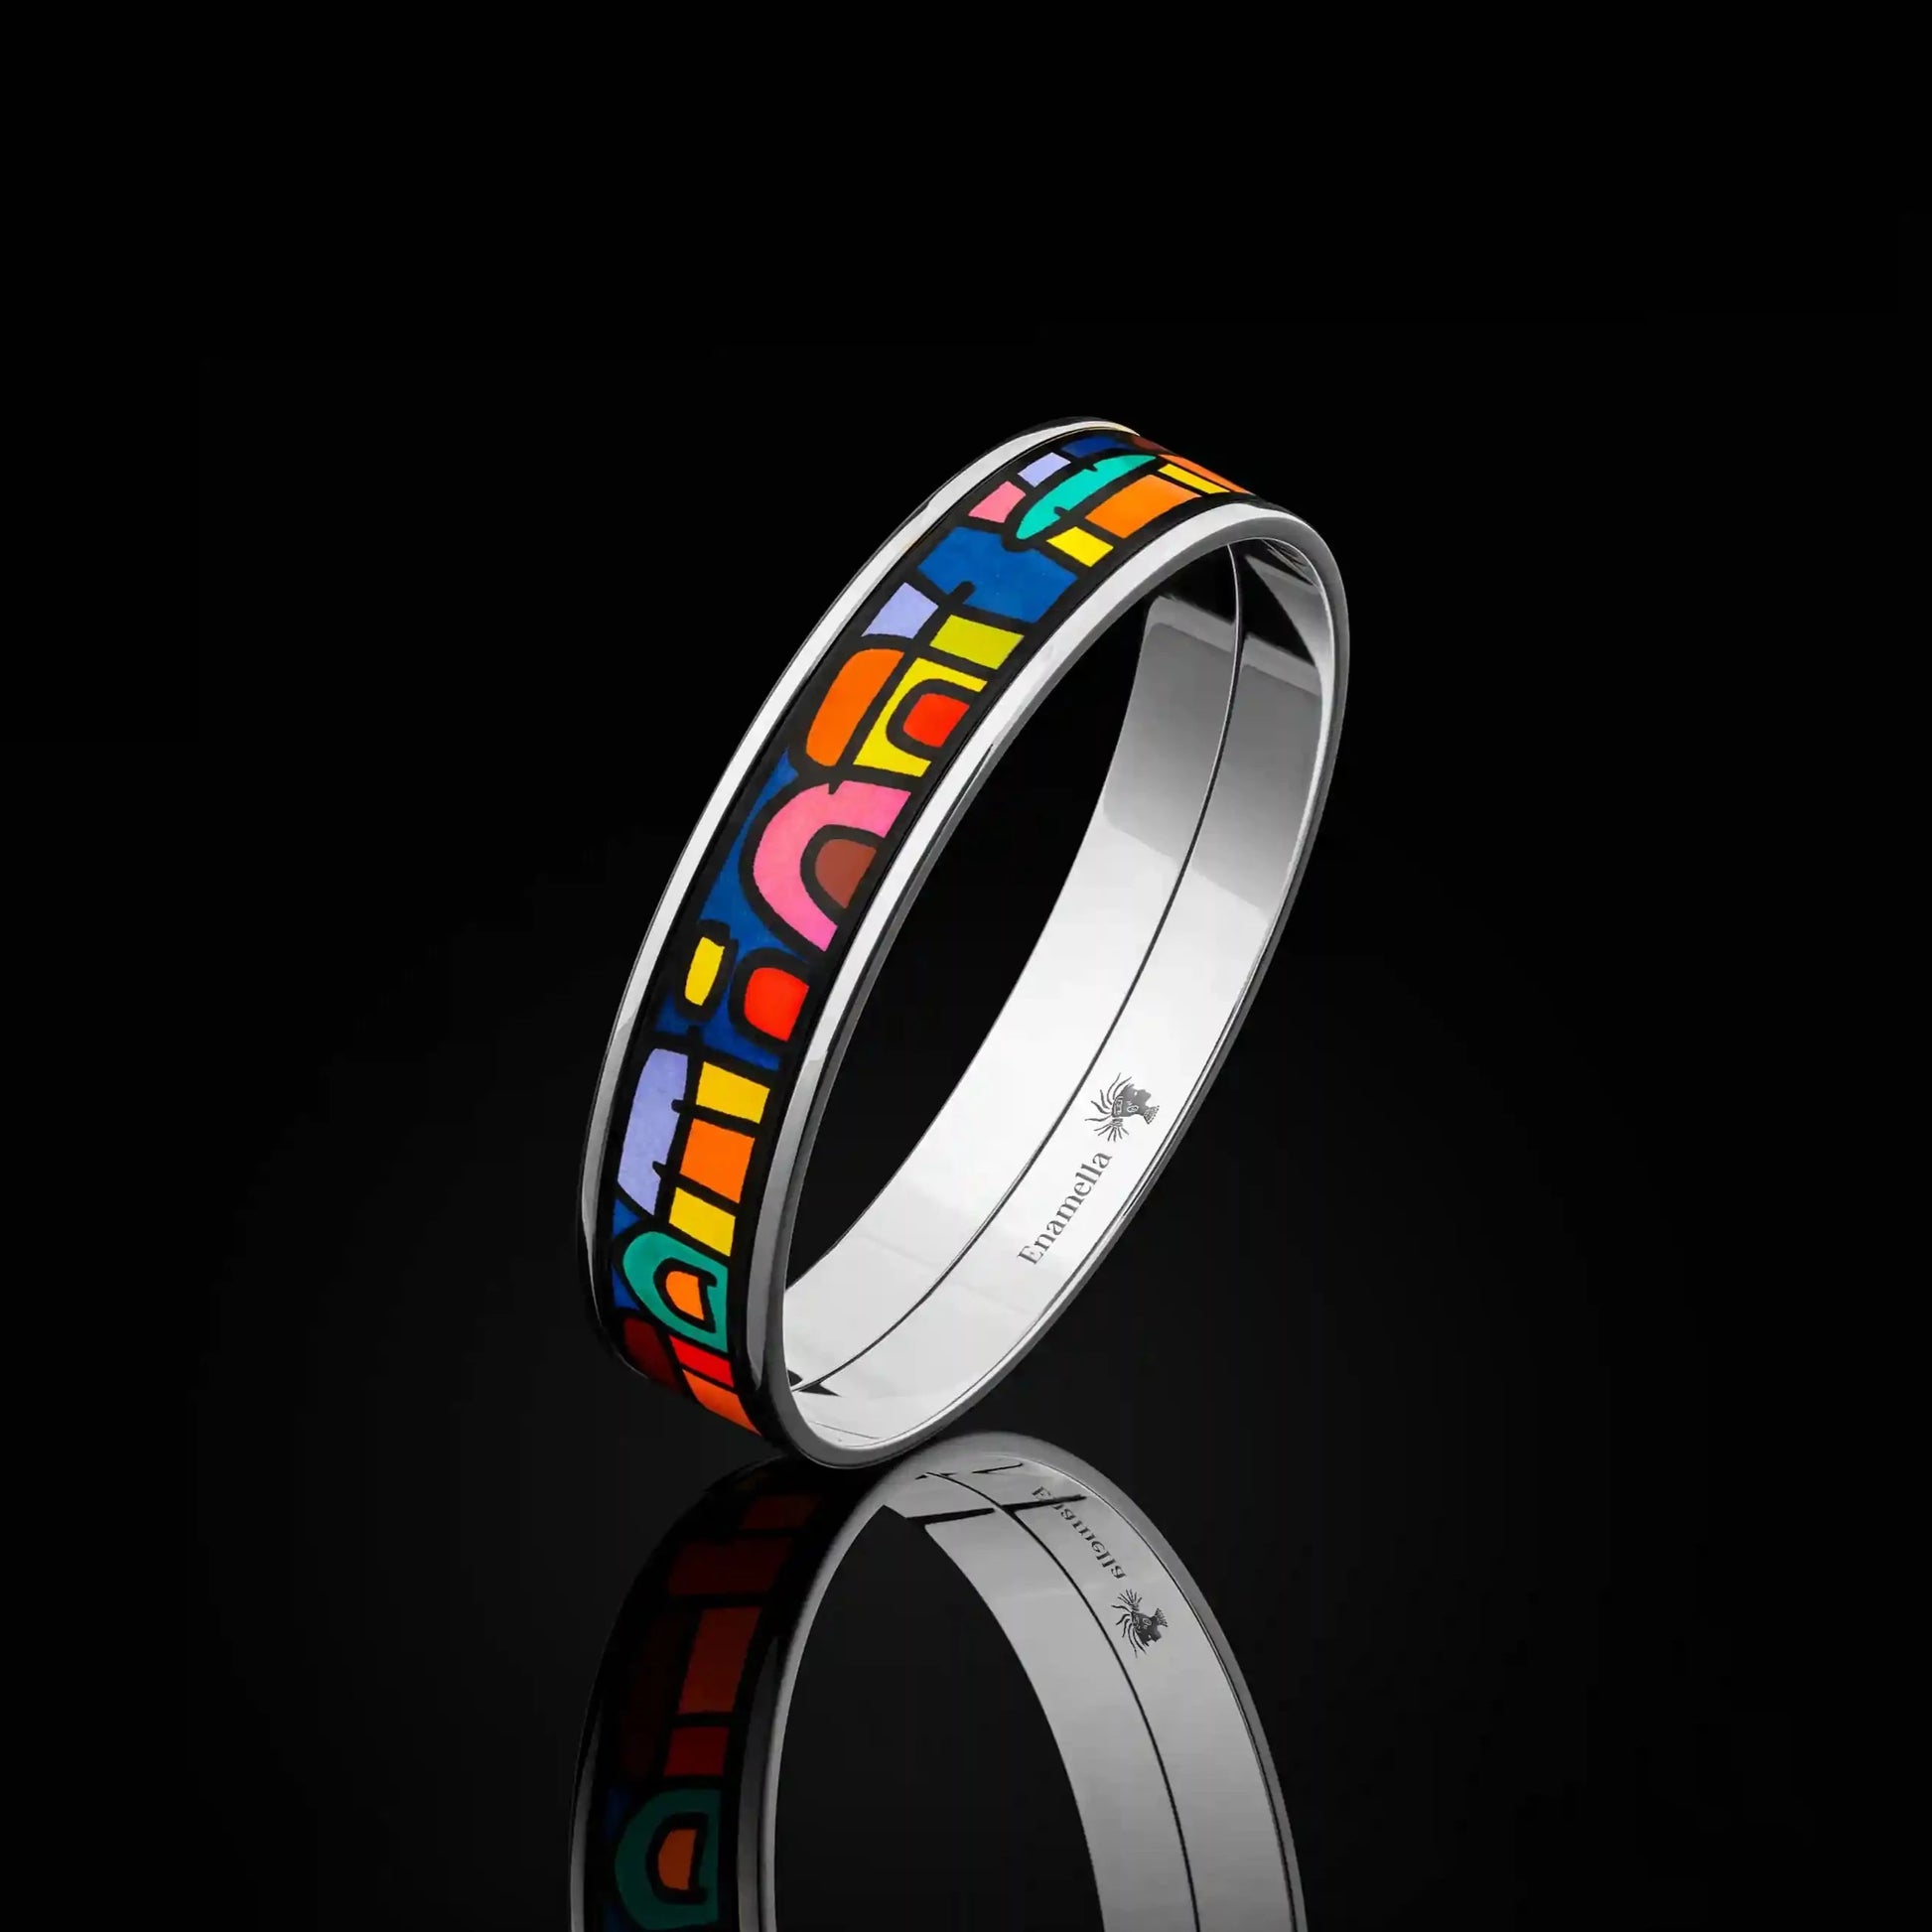 White gold bracelet with the painting of Friedensreich Hundertwasser's "Spanish Nights" in a center